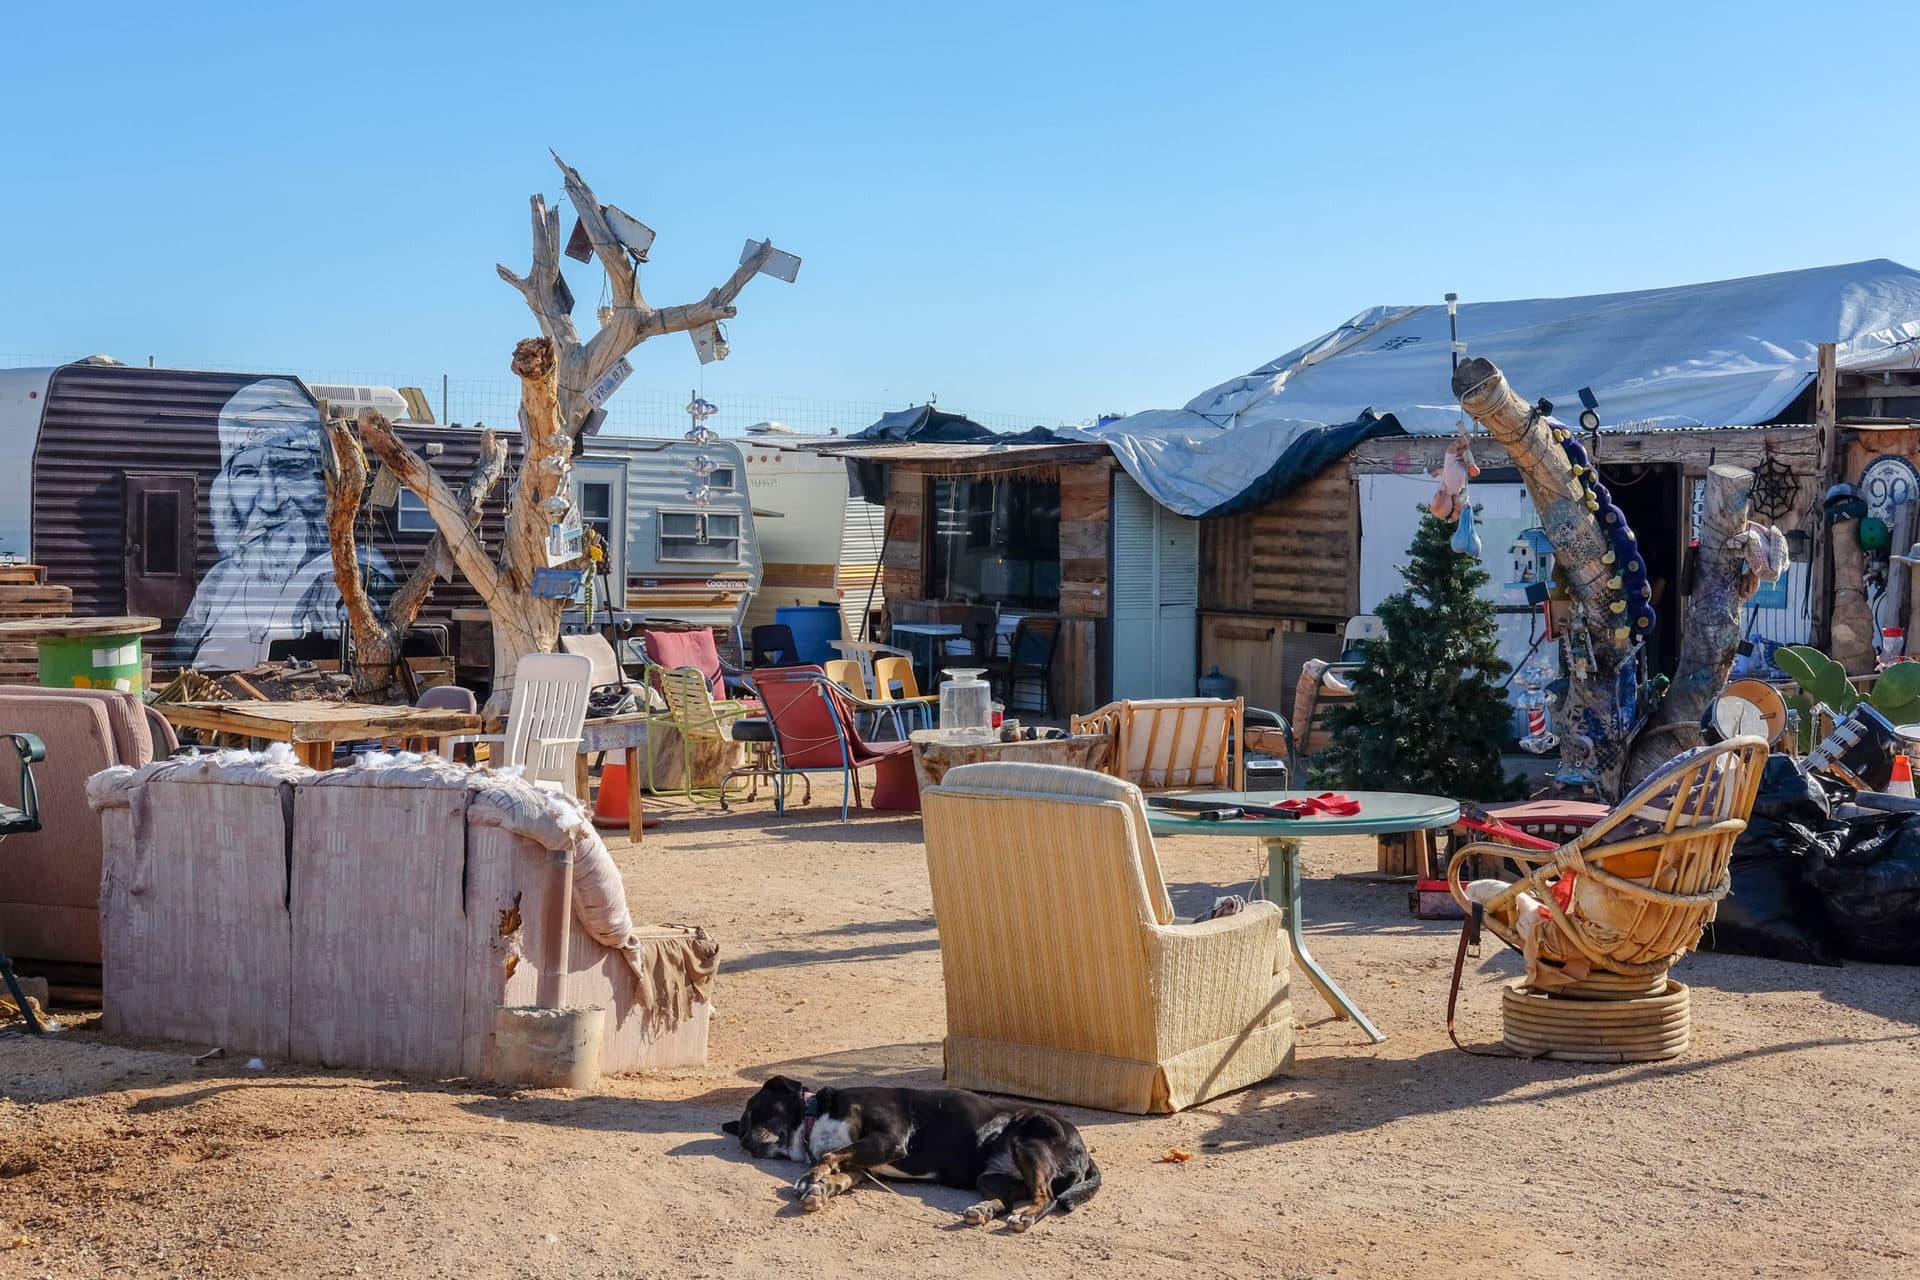 As Slab City grows, the community of outcasts, squatters, and desert